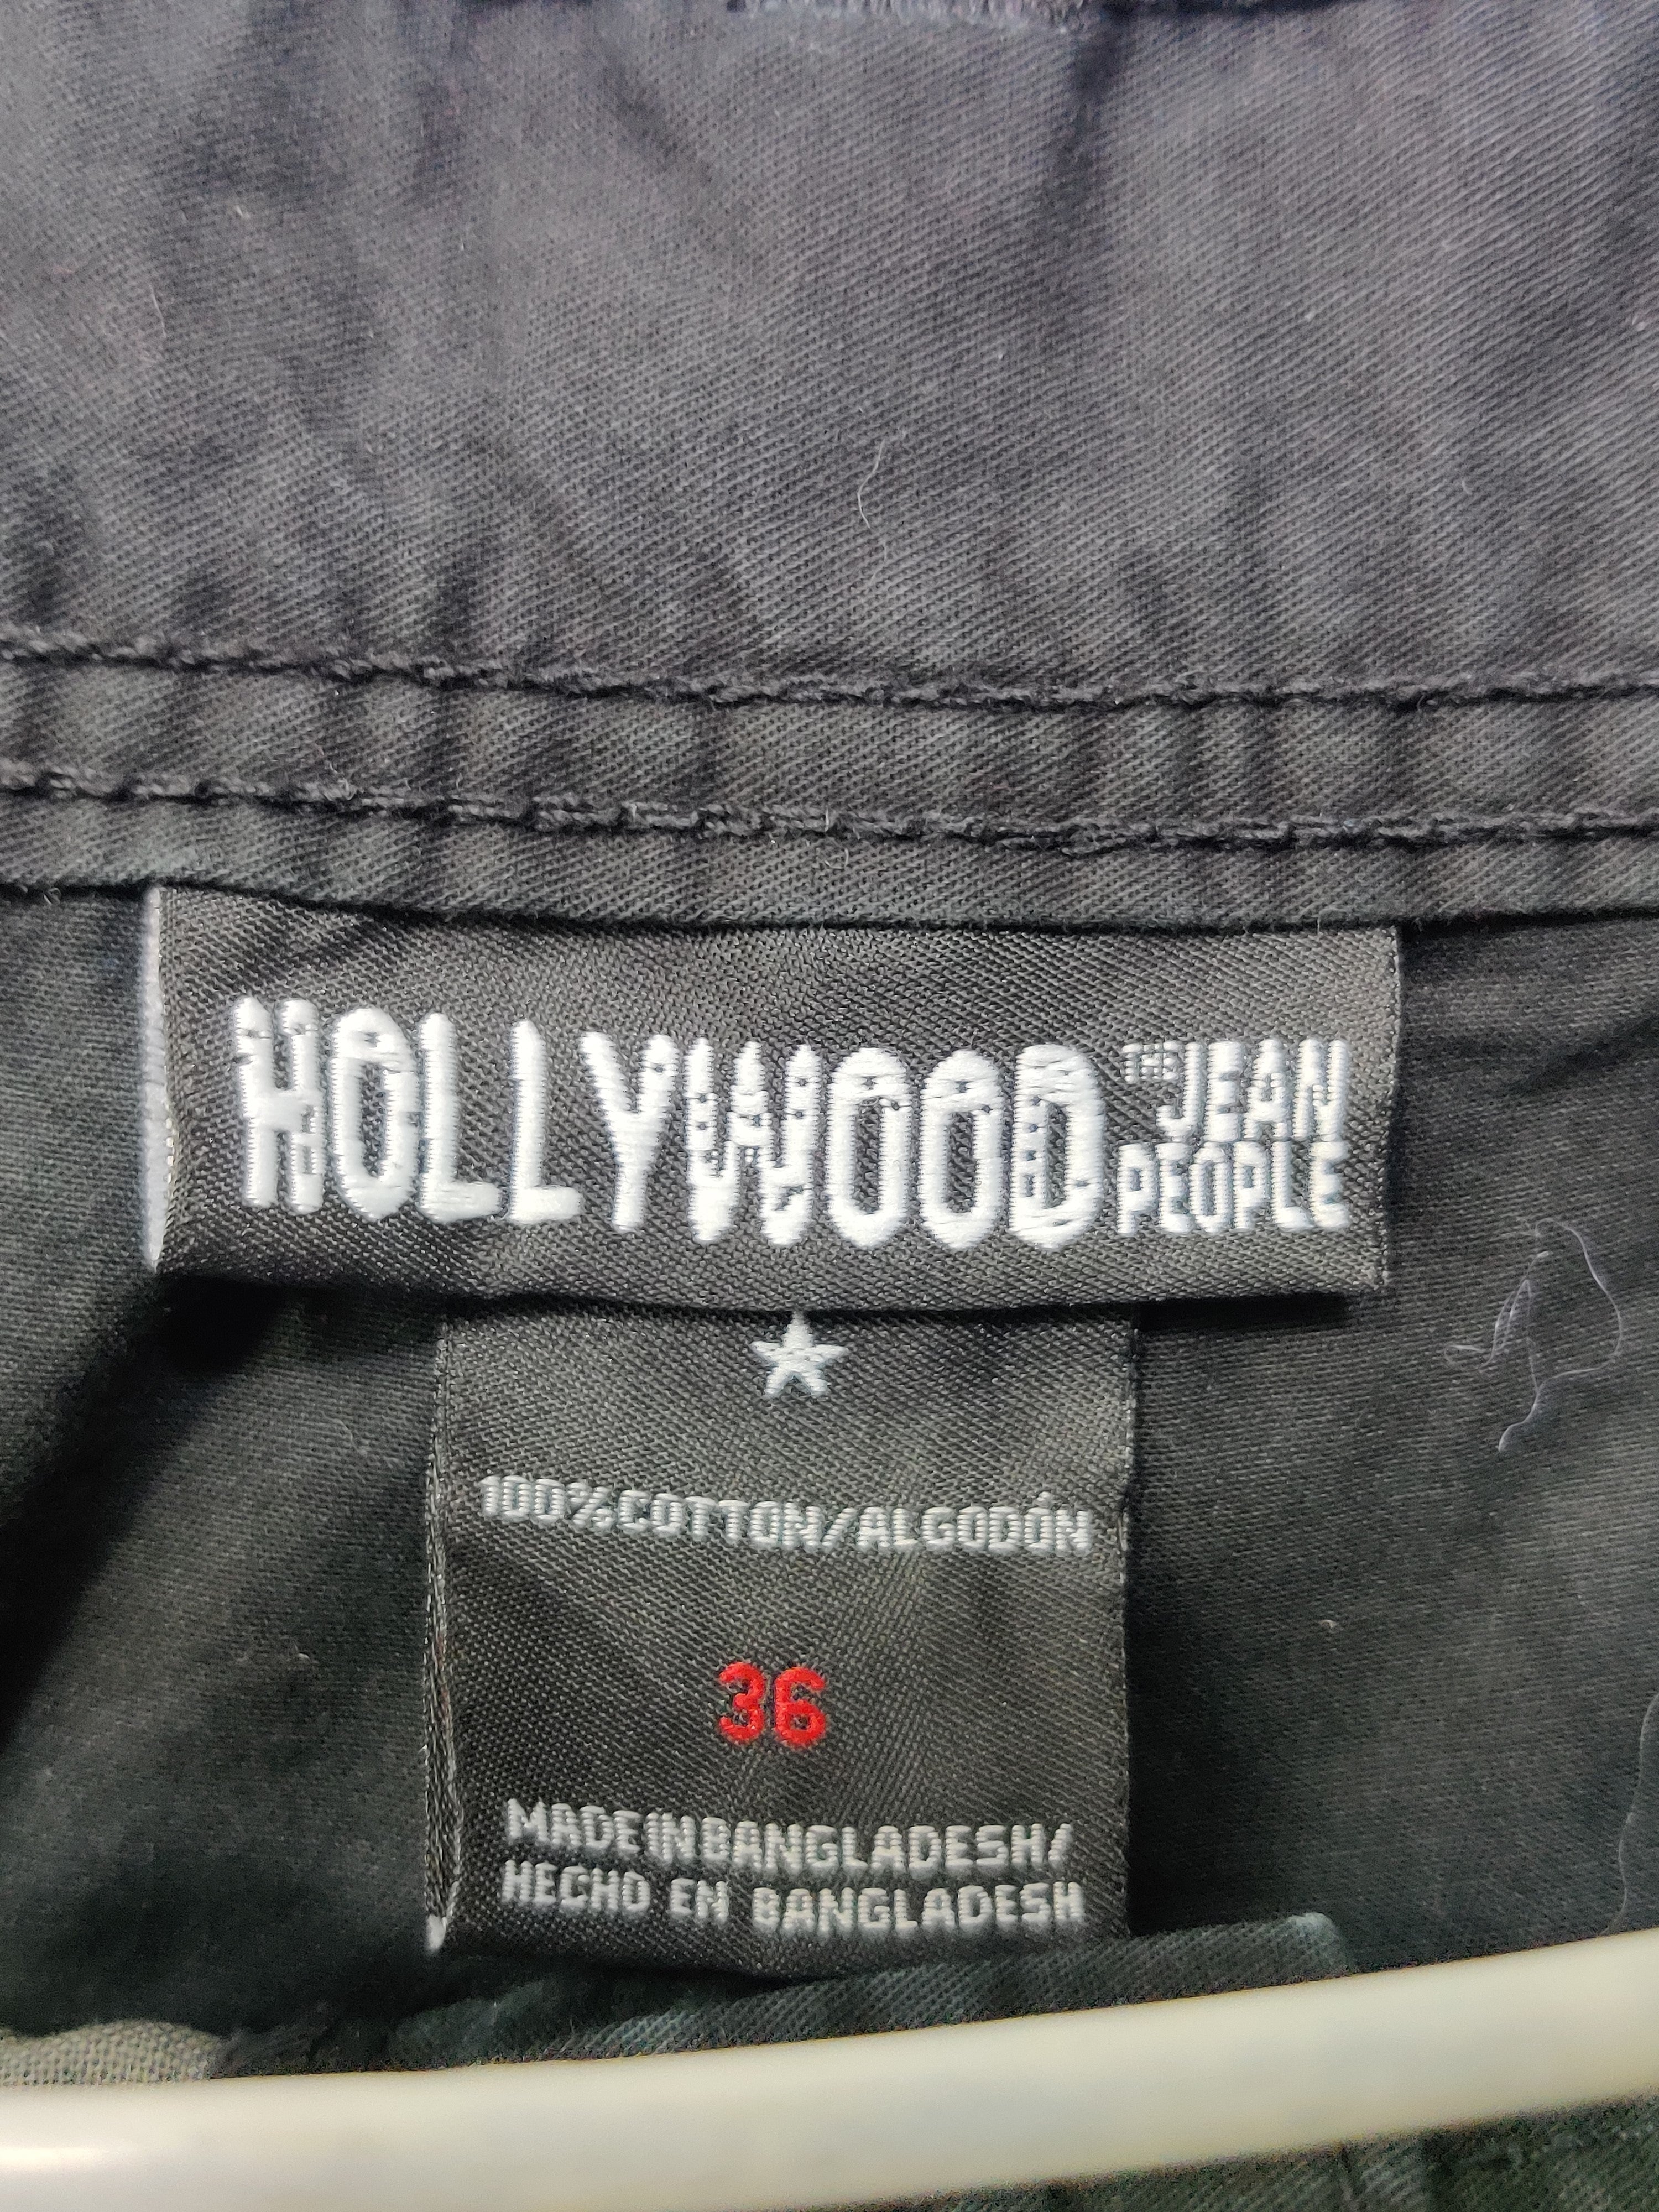 Hollywood Jean People Branded Original Cotton For Men Cargo Pant